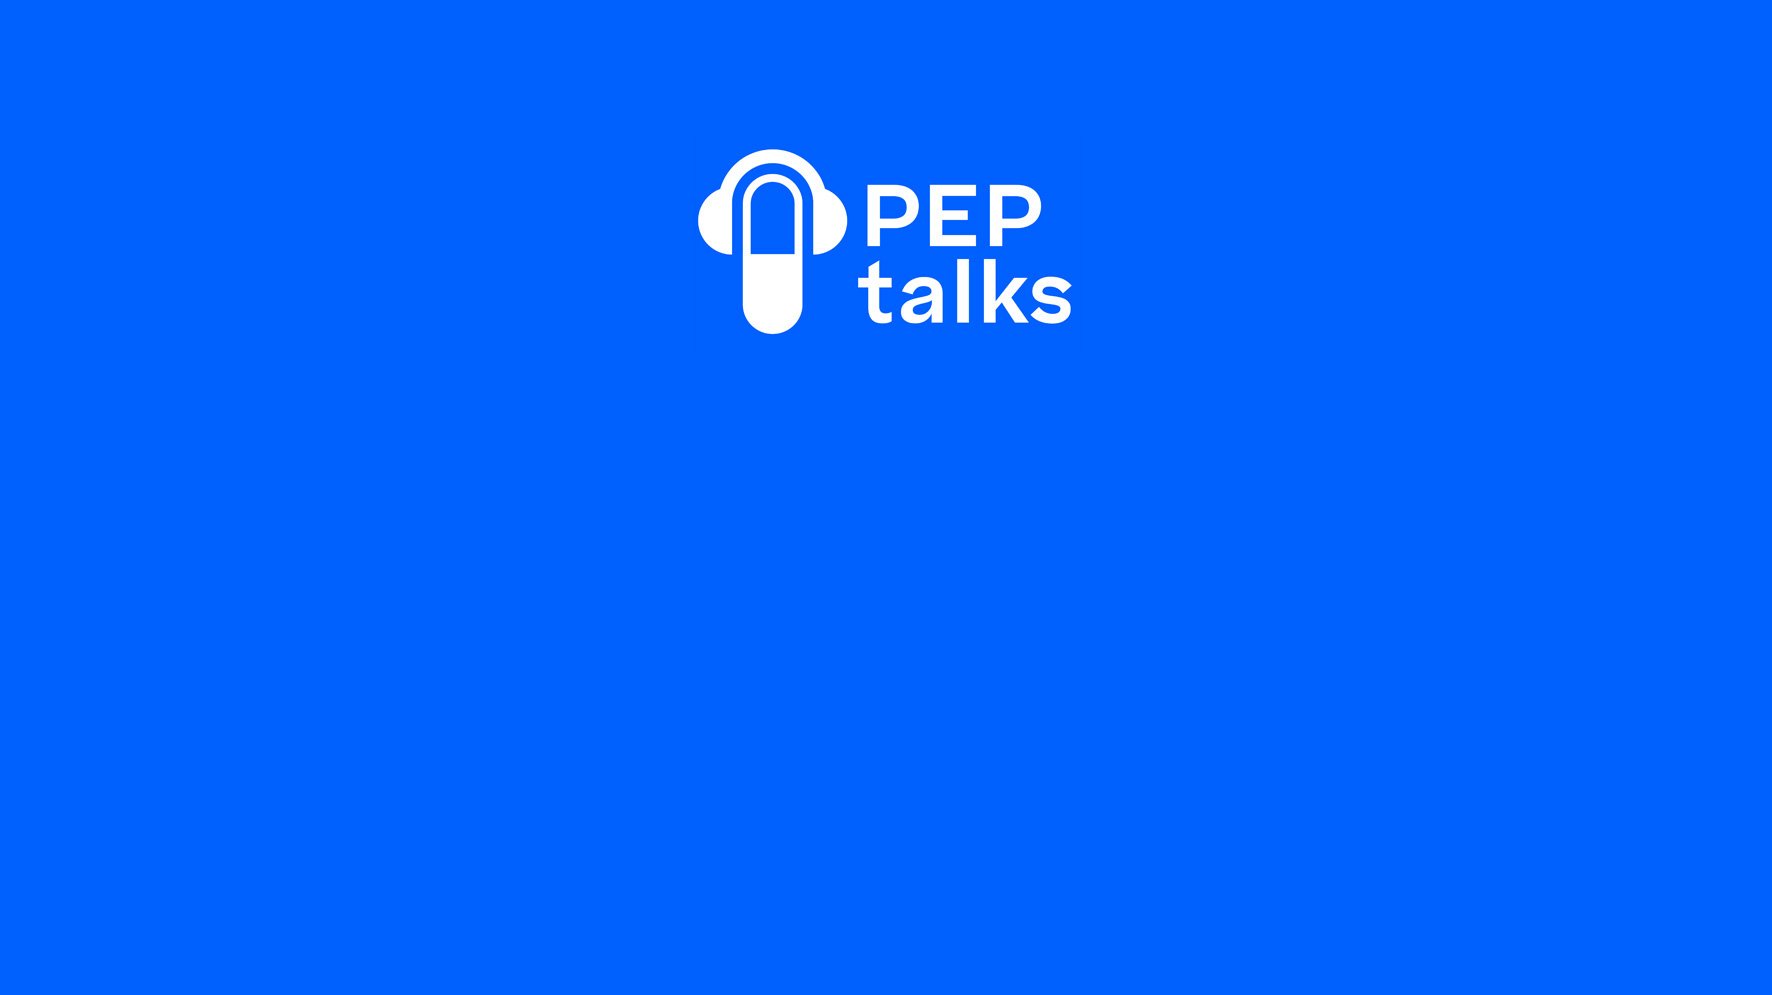 Welcome to the PEP talks podcast